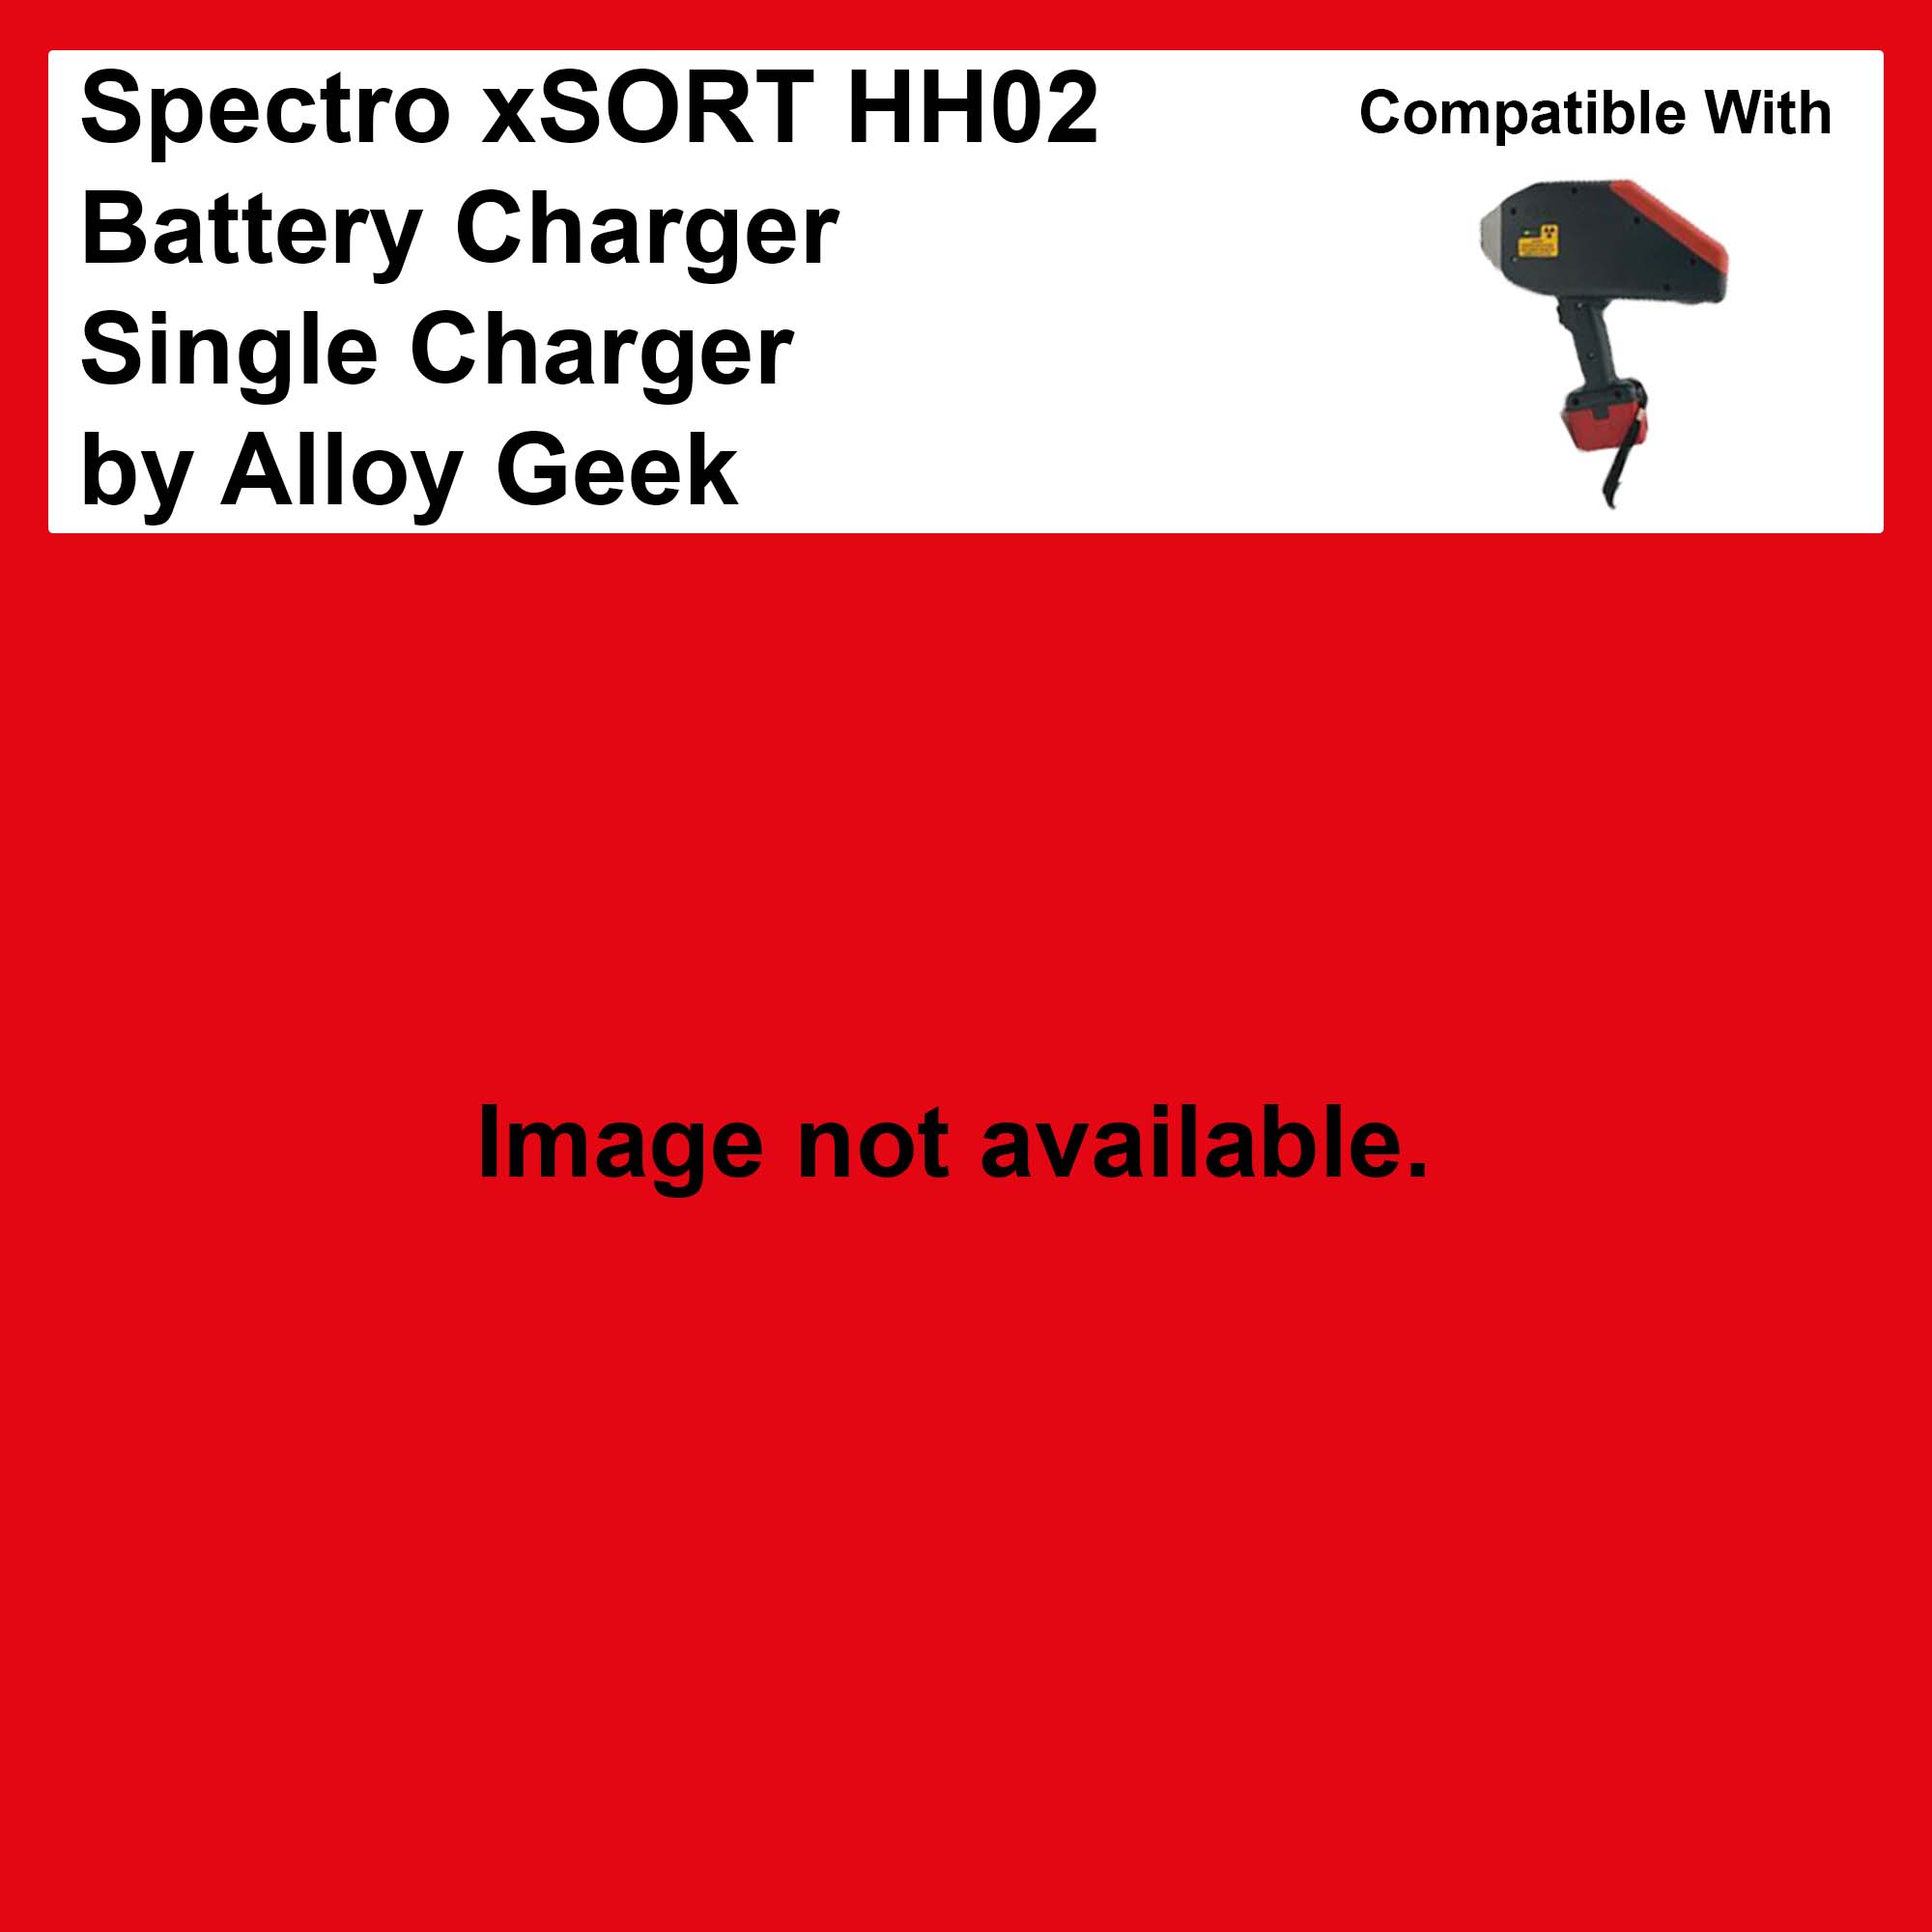 Spectro xSORT HH02 Battery Charger PN 770200091